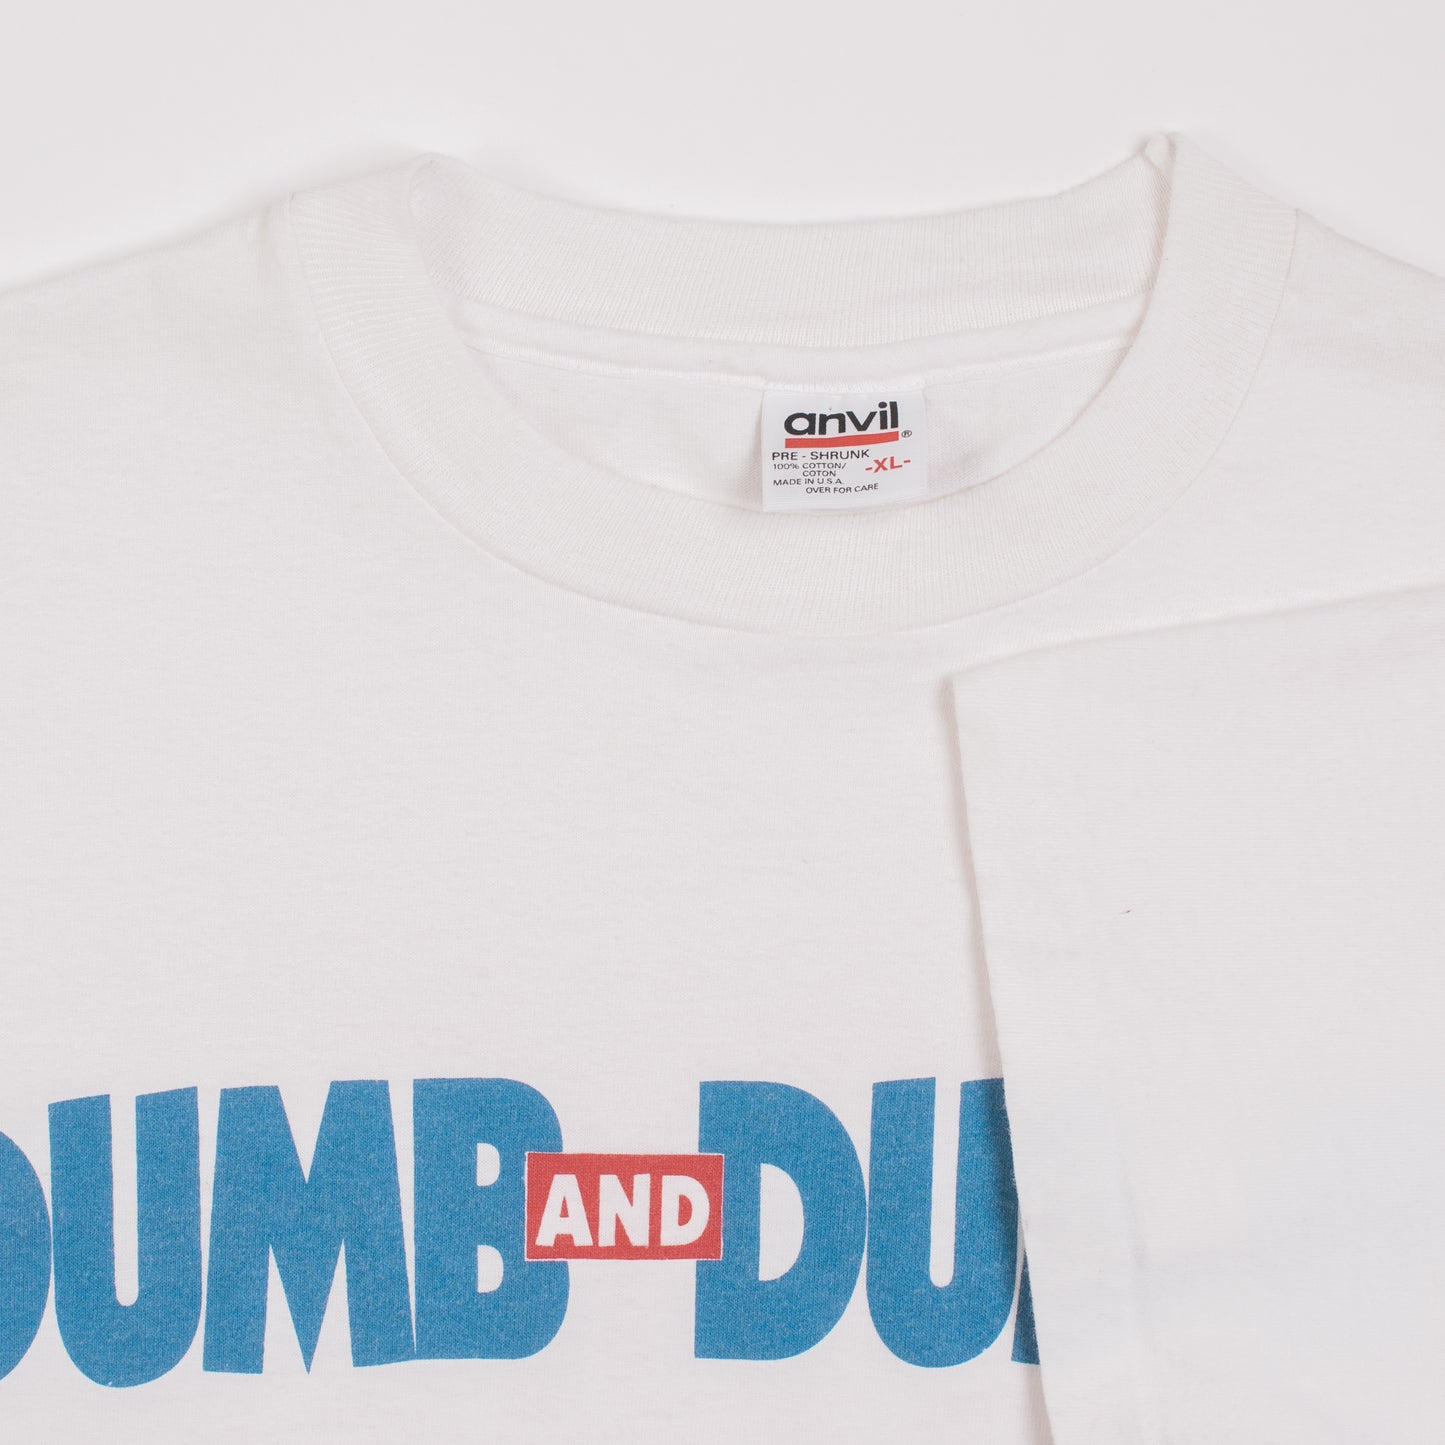 Vintage 90’s Dumb And Dumber Movie Promo T-Shirt